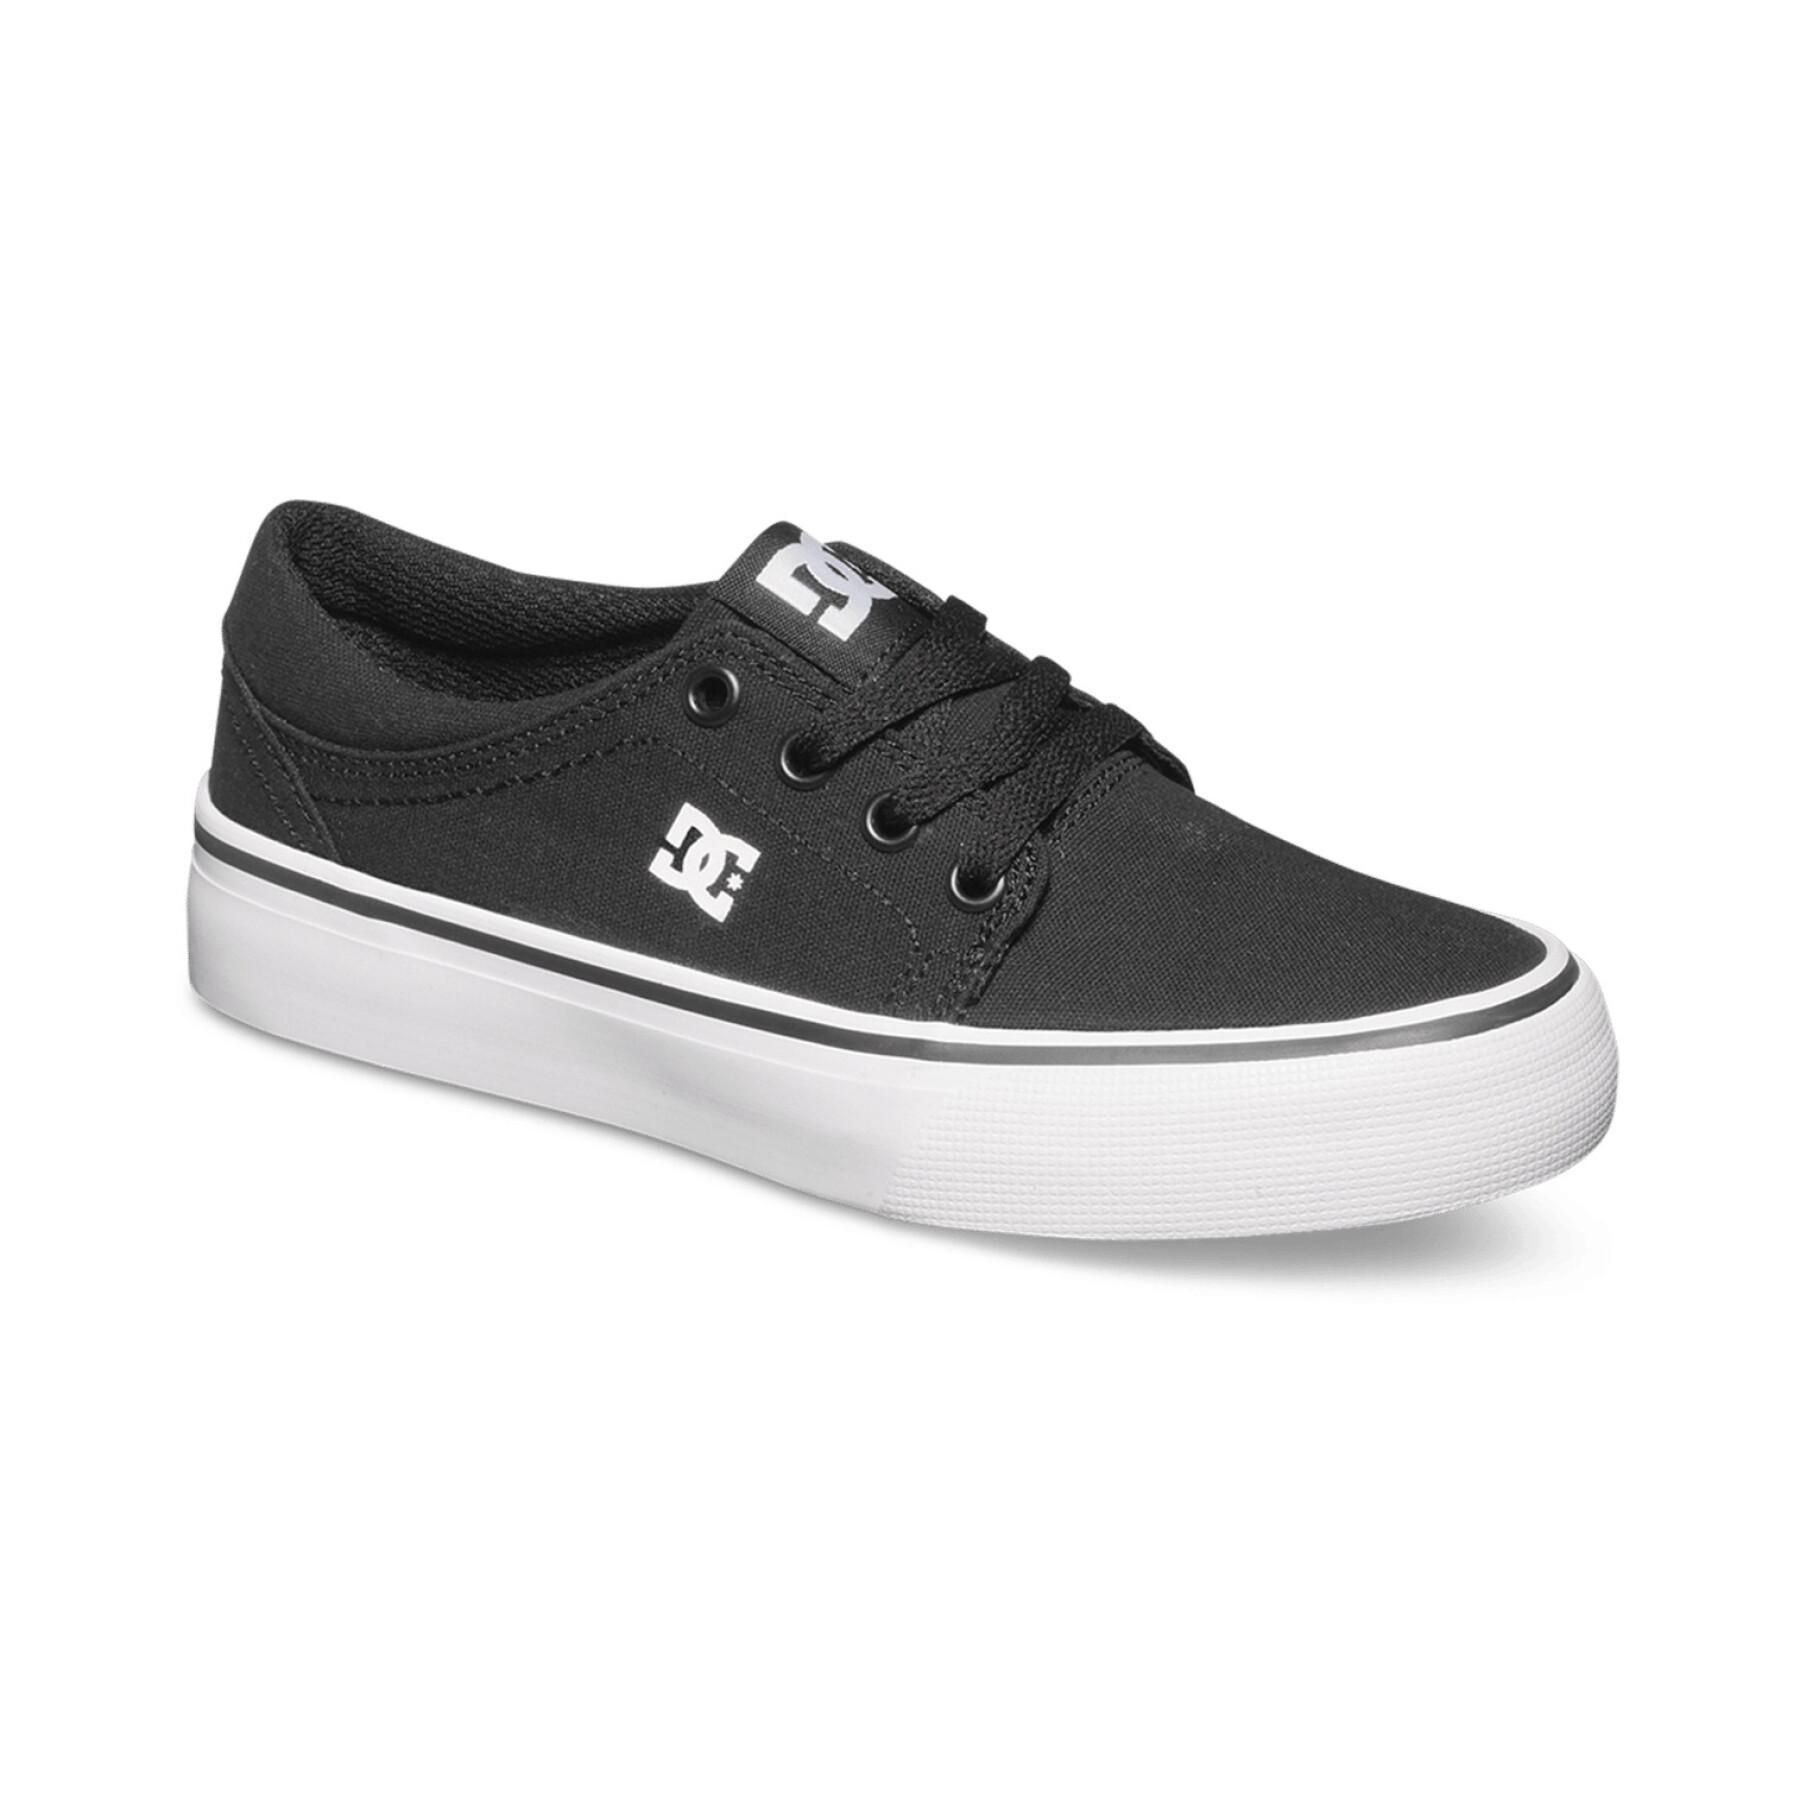 Children's sneakers DC Shoes Trase Tx